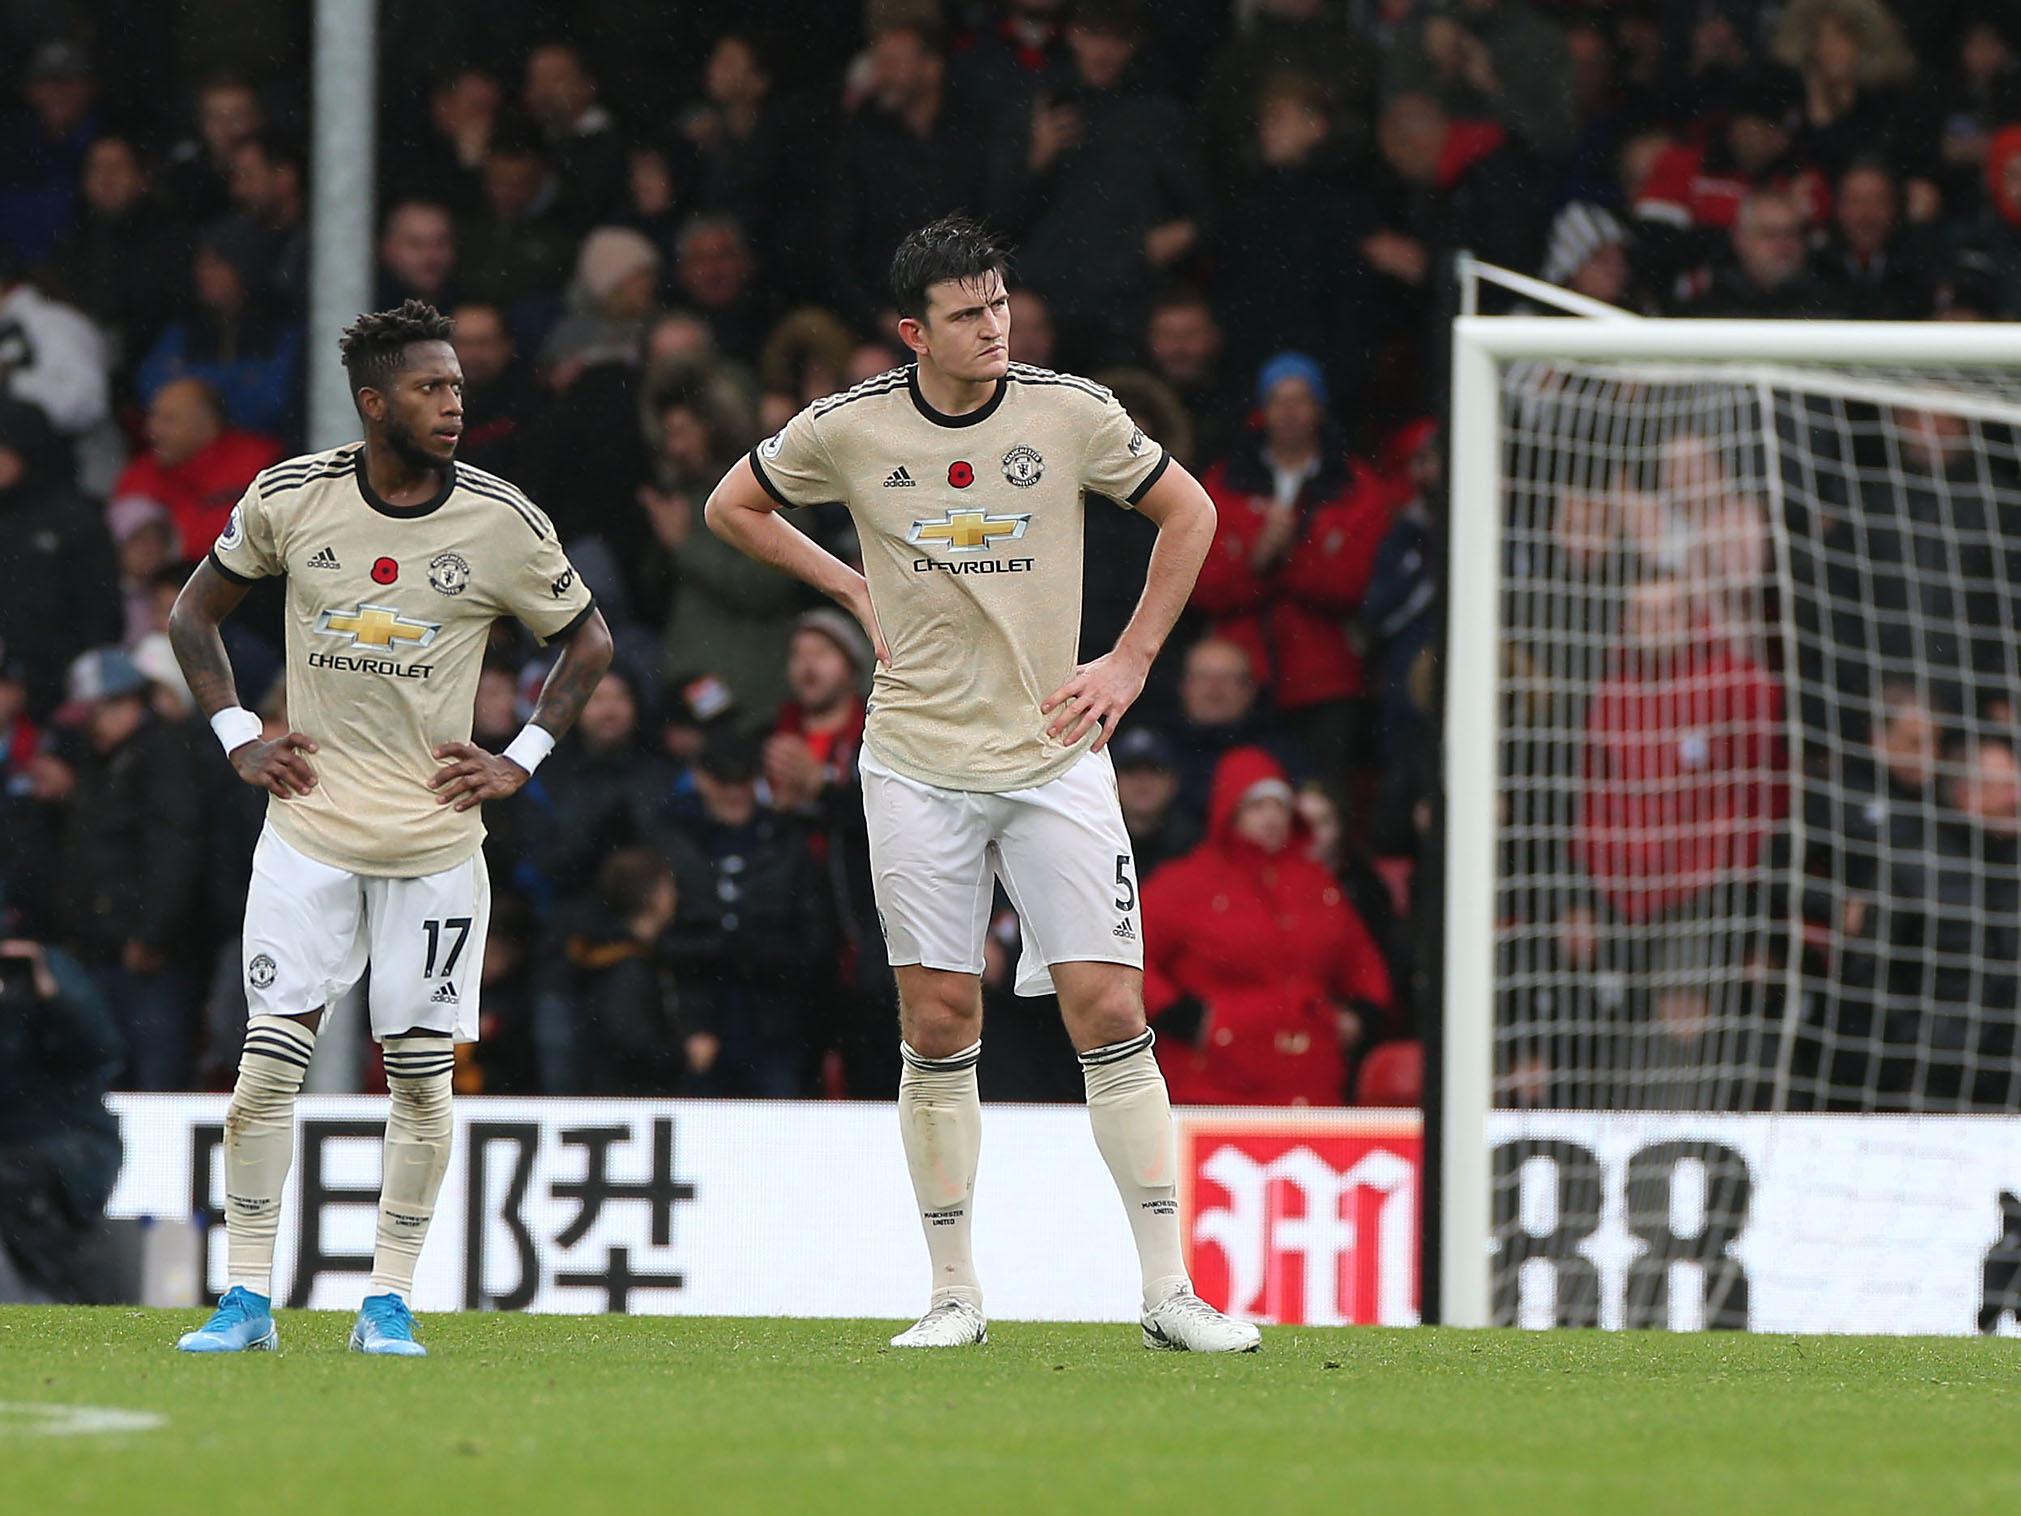 Manchester United slipped to a 1-0 defeat at a wet Vitality Stadium